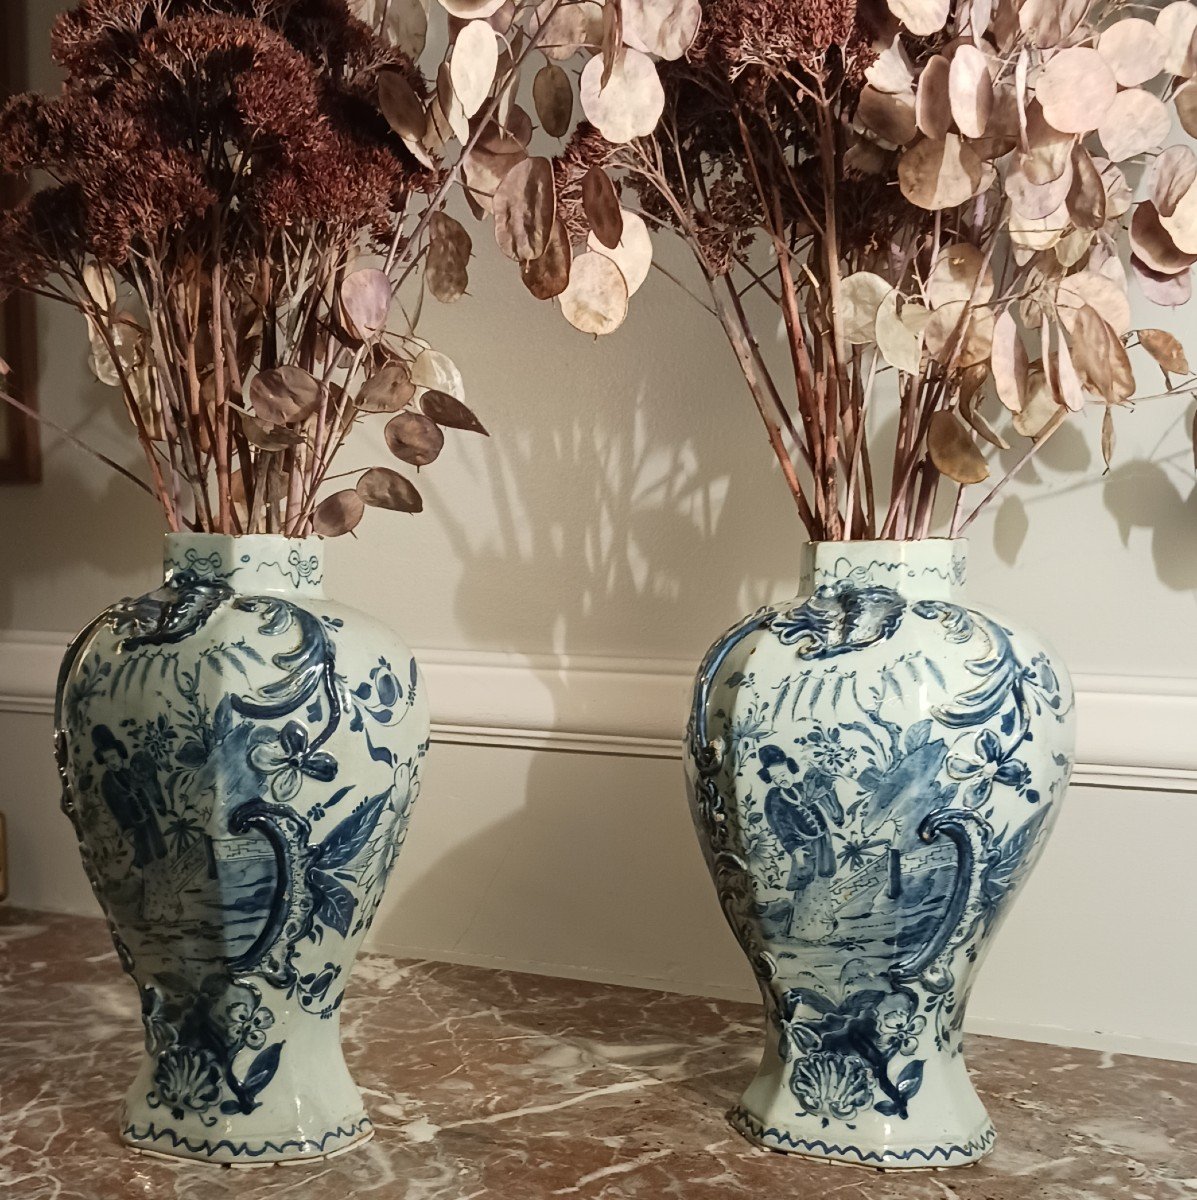 Delft, 18th Century - Pair Of Earthenware Vases - Chinese And Rocaille Decoration - " Kraak Style "-photo-3